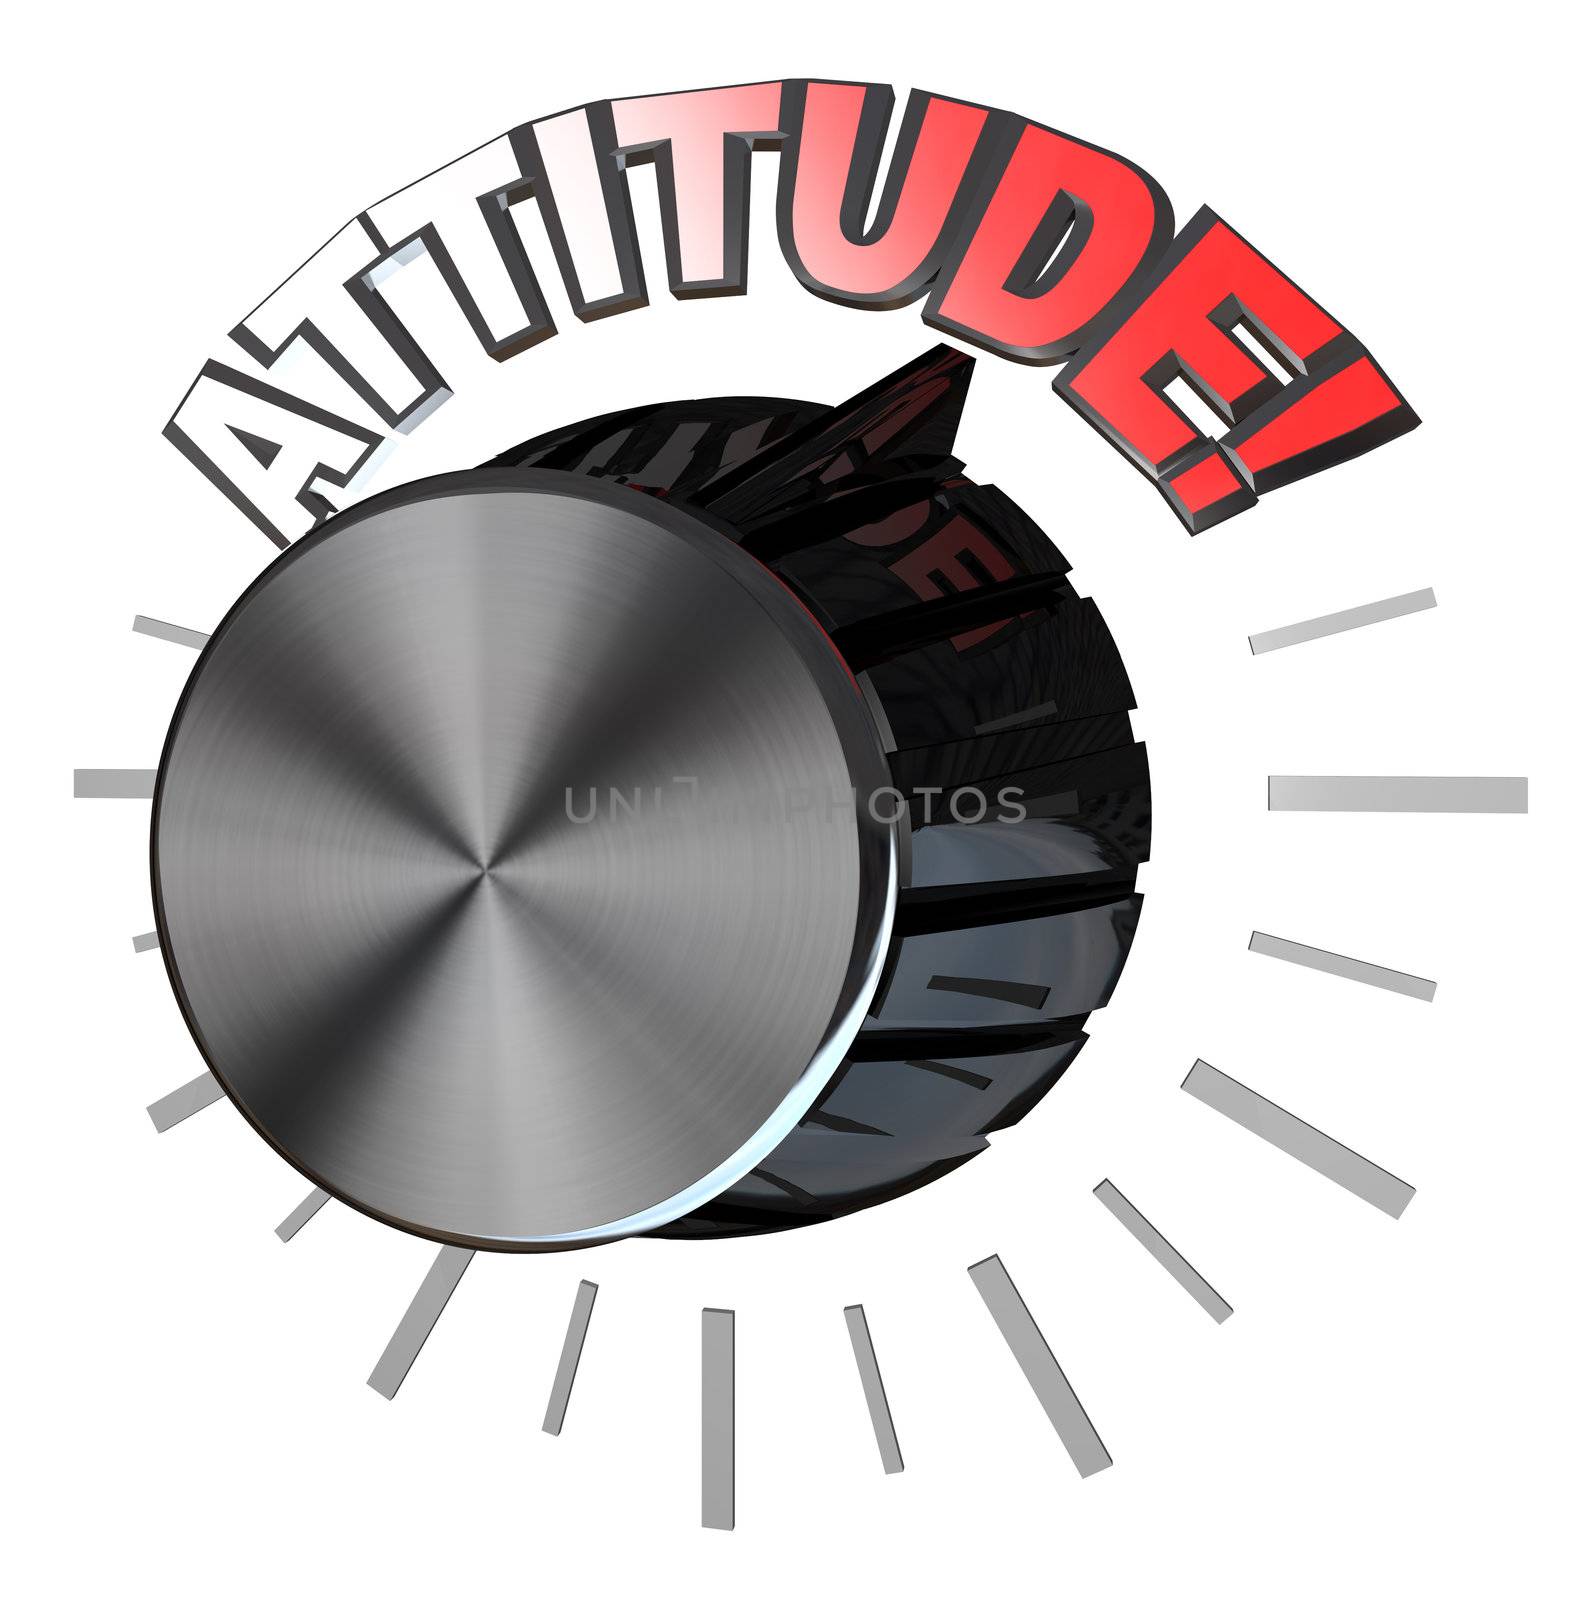 An amplifier or speaker type volume knob with the pointer turned up to the word Attitude to represent the highest level of positive attitude that one can reach in order to succeed in meeting a goal